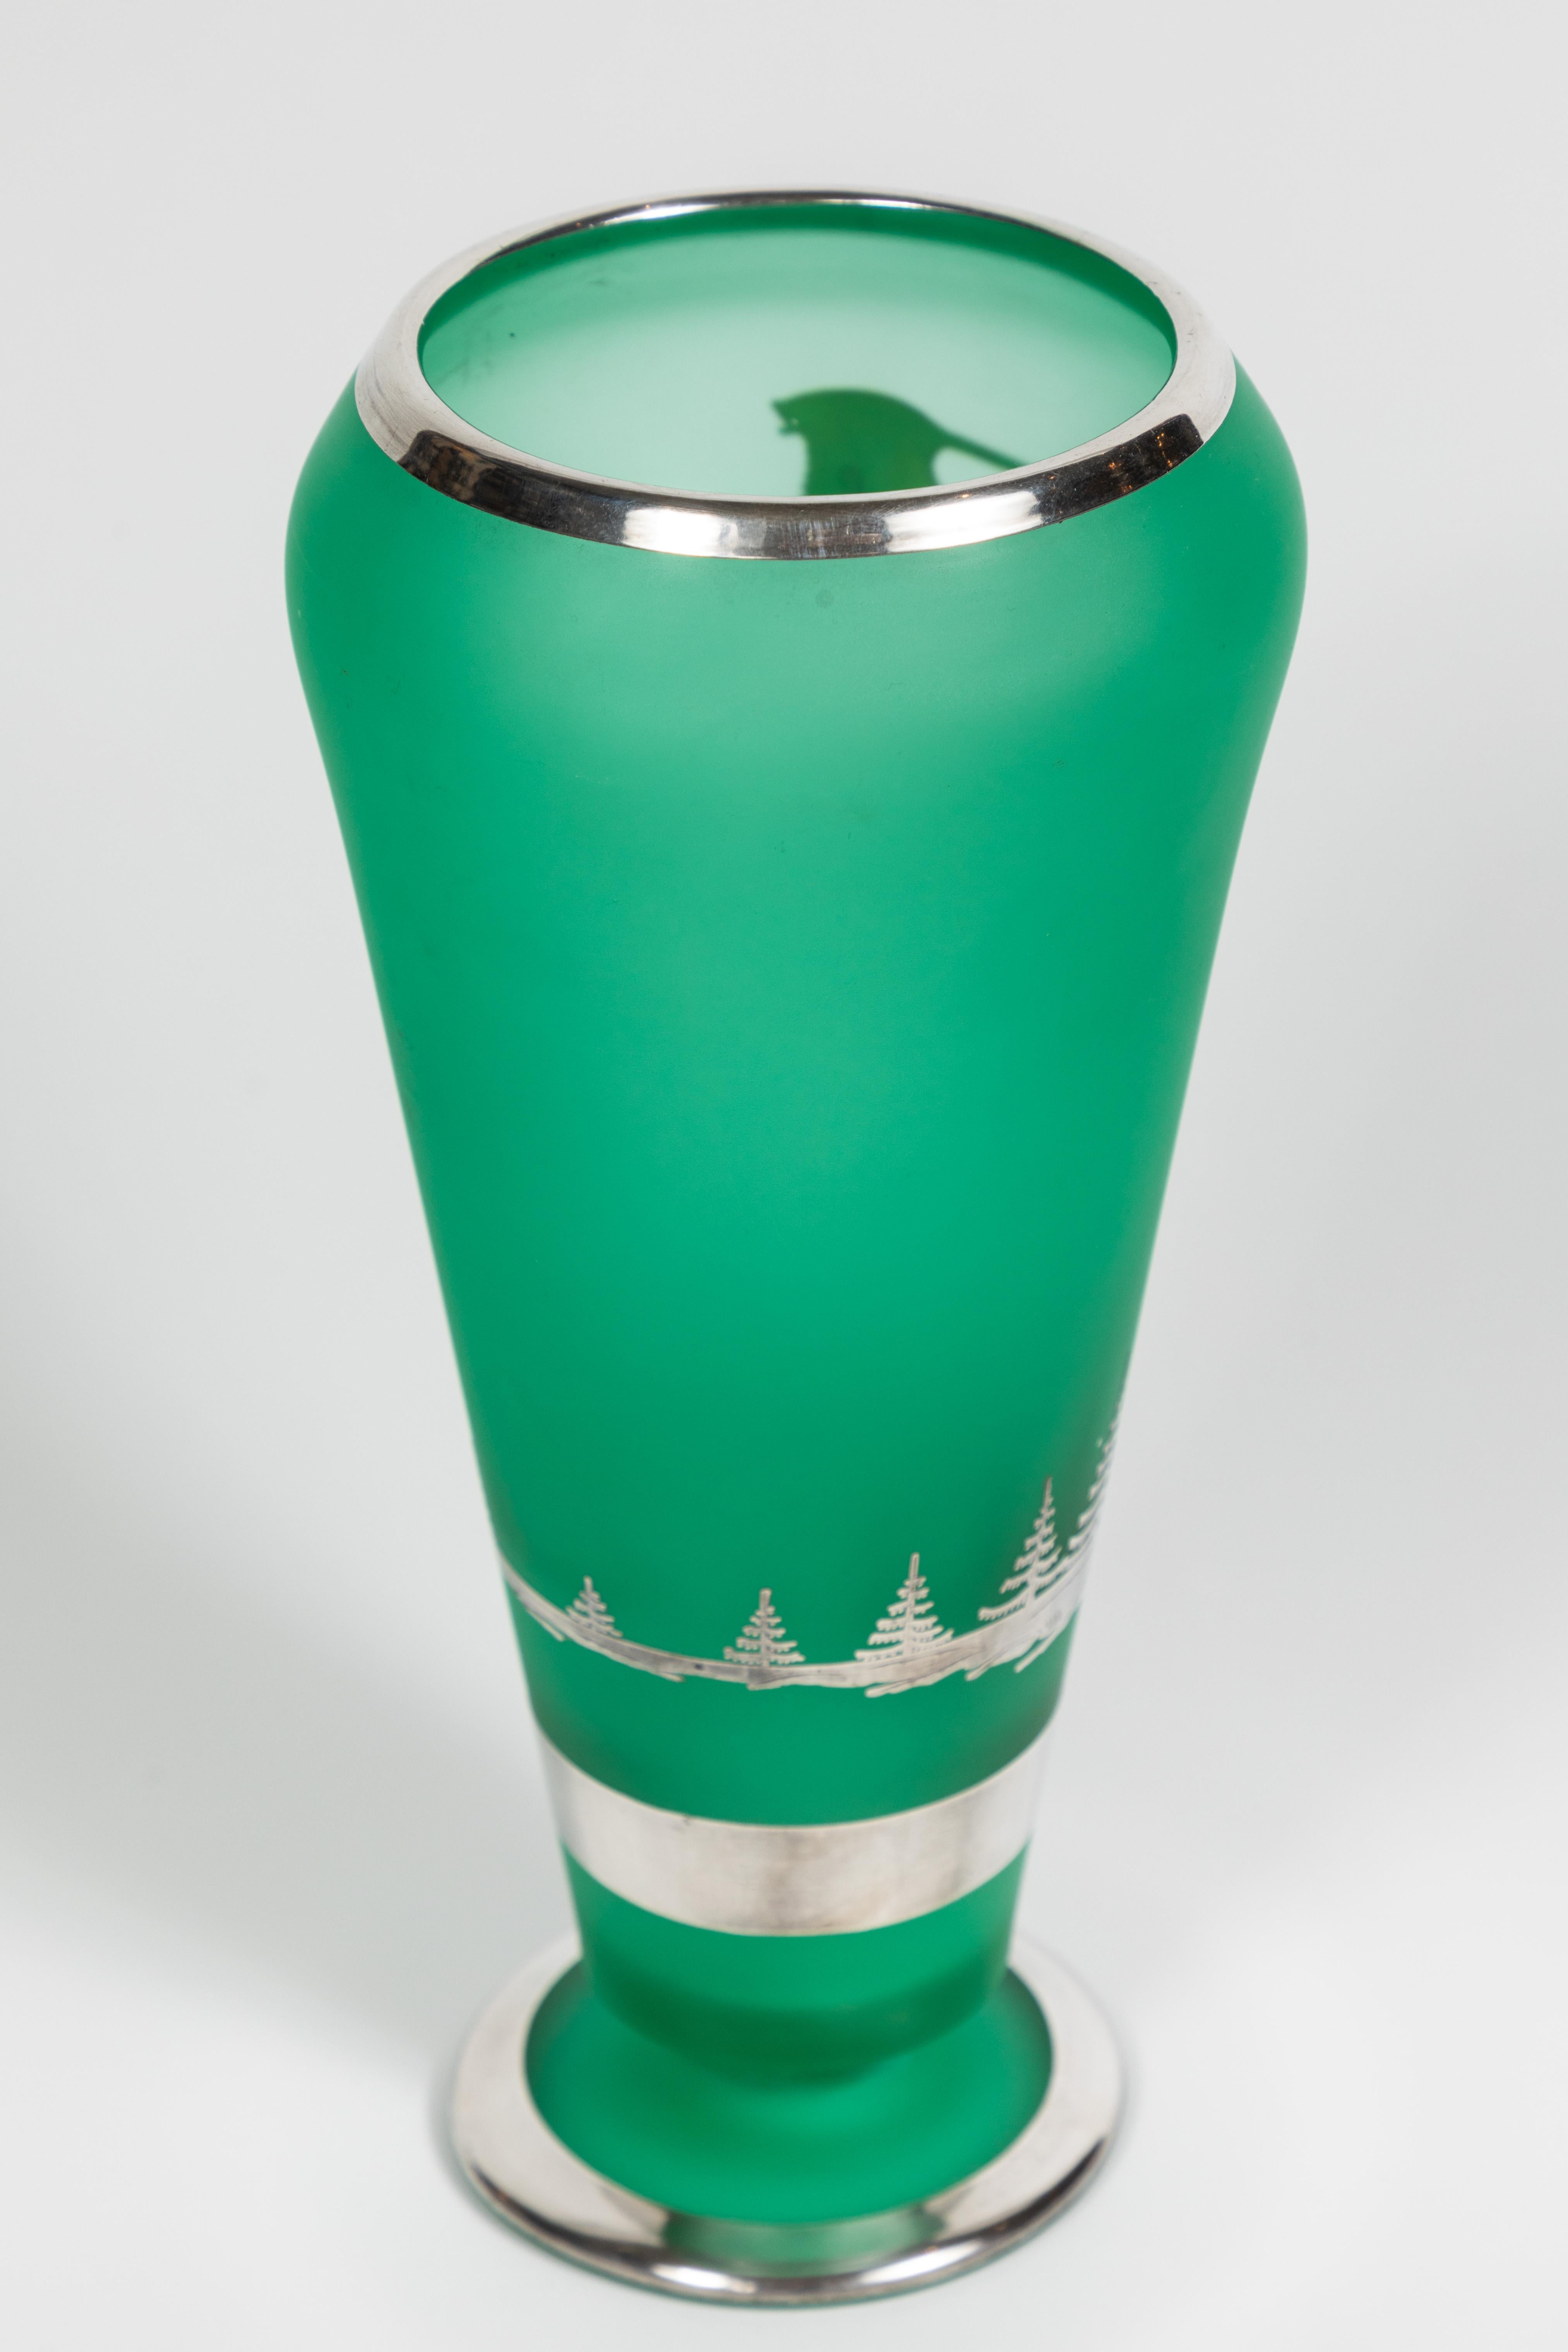 American Art Deco Tiffin Green Satin Glass Vase with Rockwell Silver Overlay